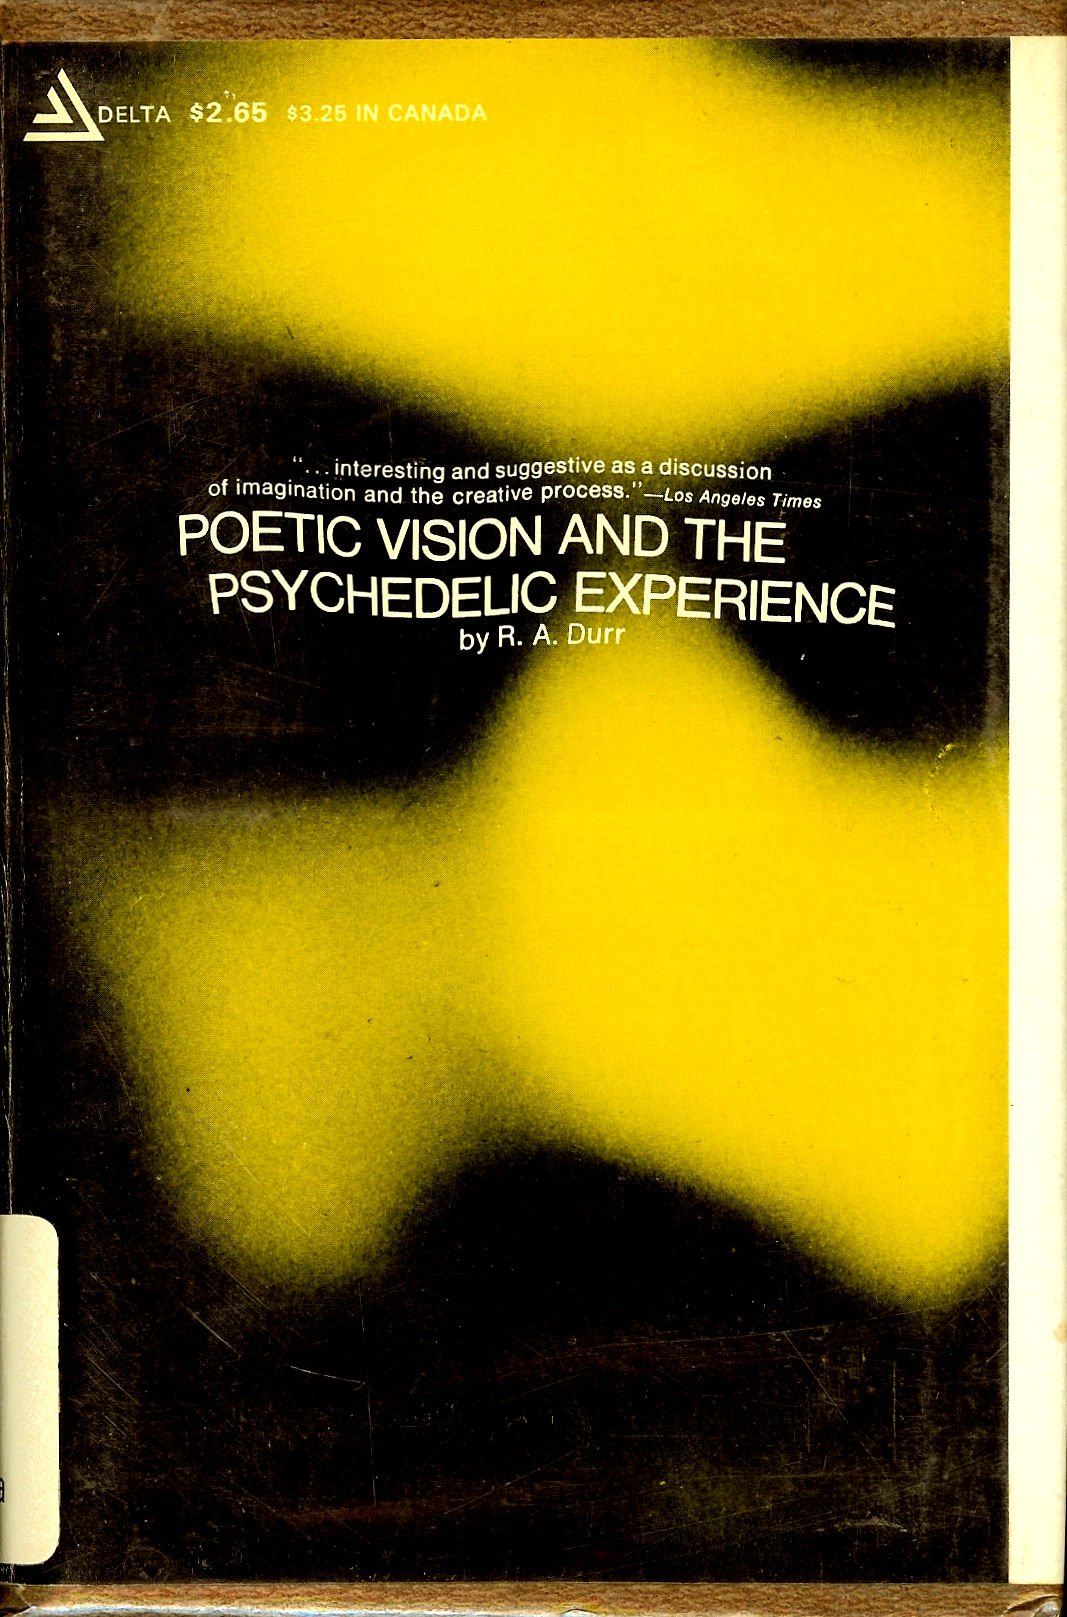 Poetic Vision and the Psychedelic Experience by R. A. Durr